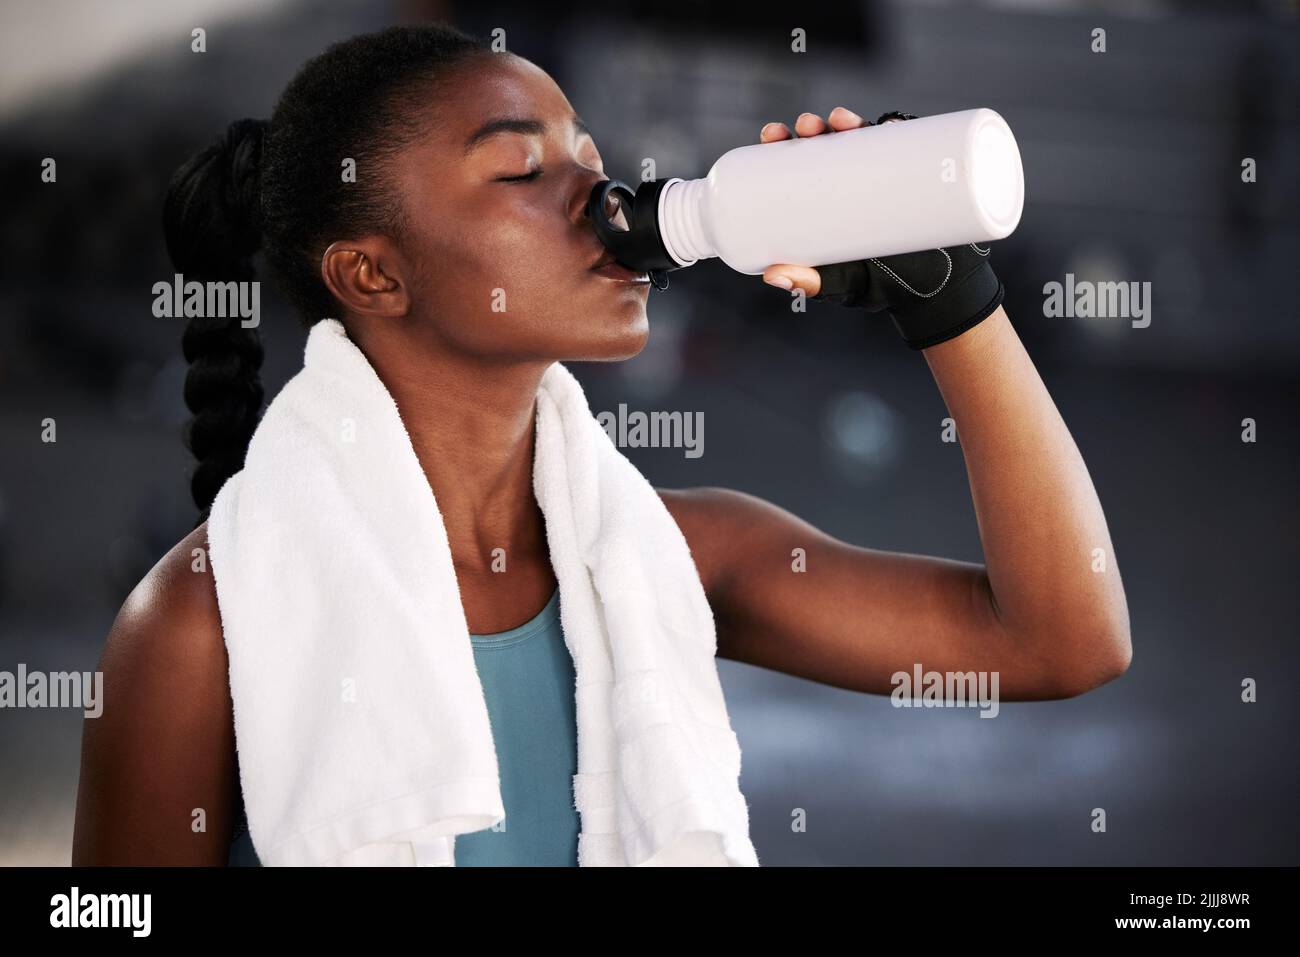 Exercise regularly and drink plenty of water. a fit young woman drinking water while at the gym. Stock Photo